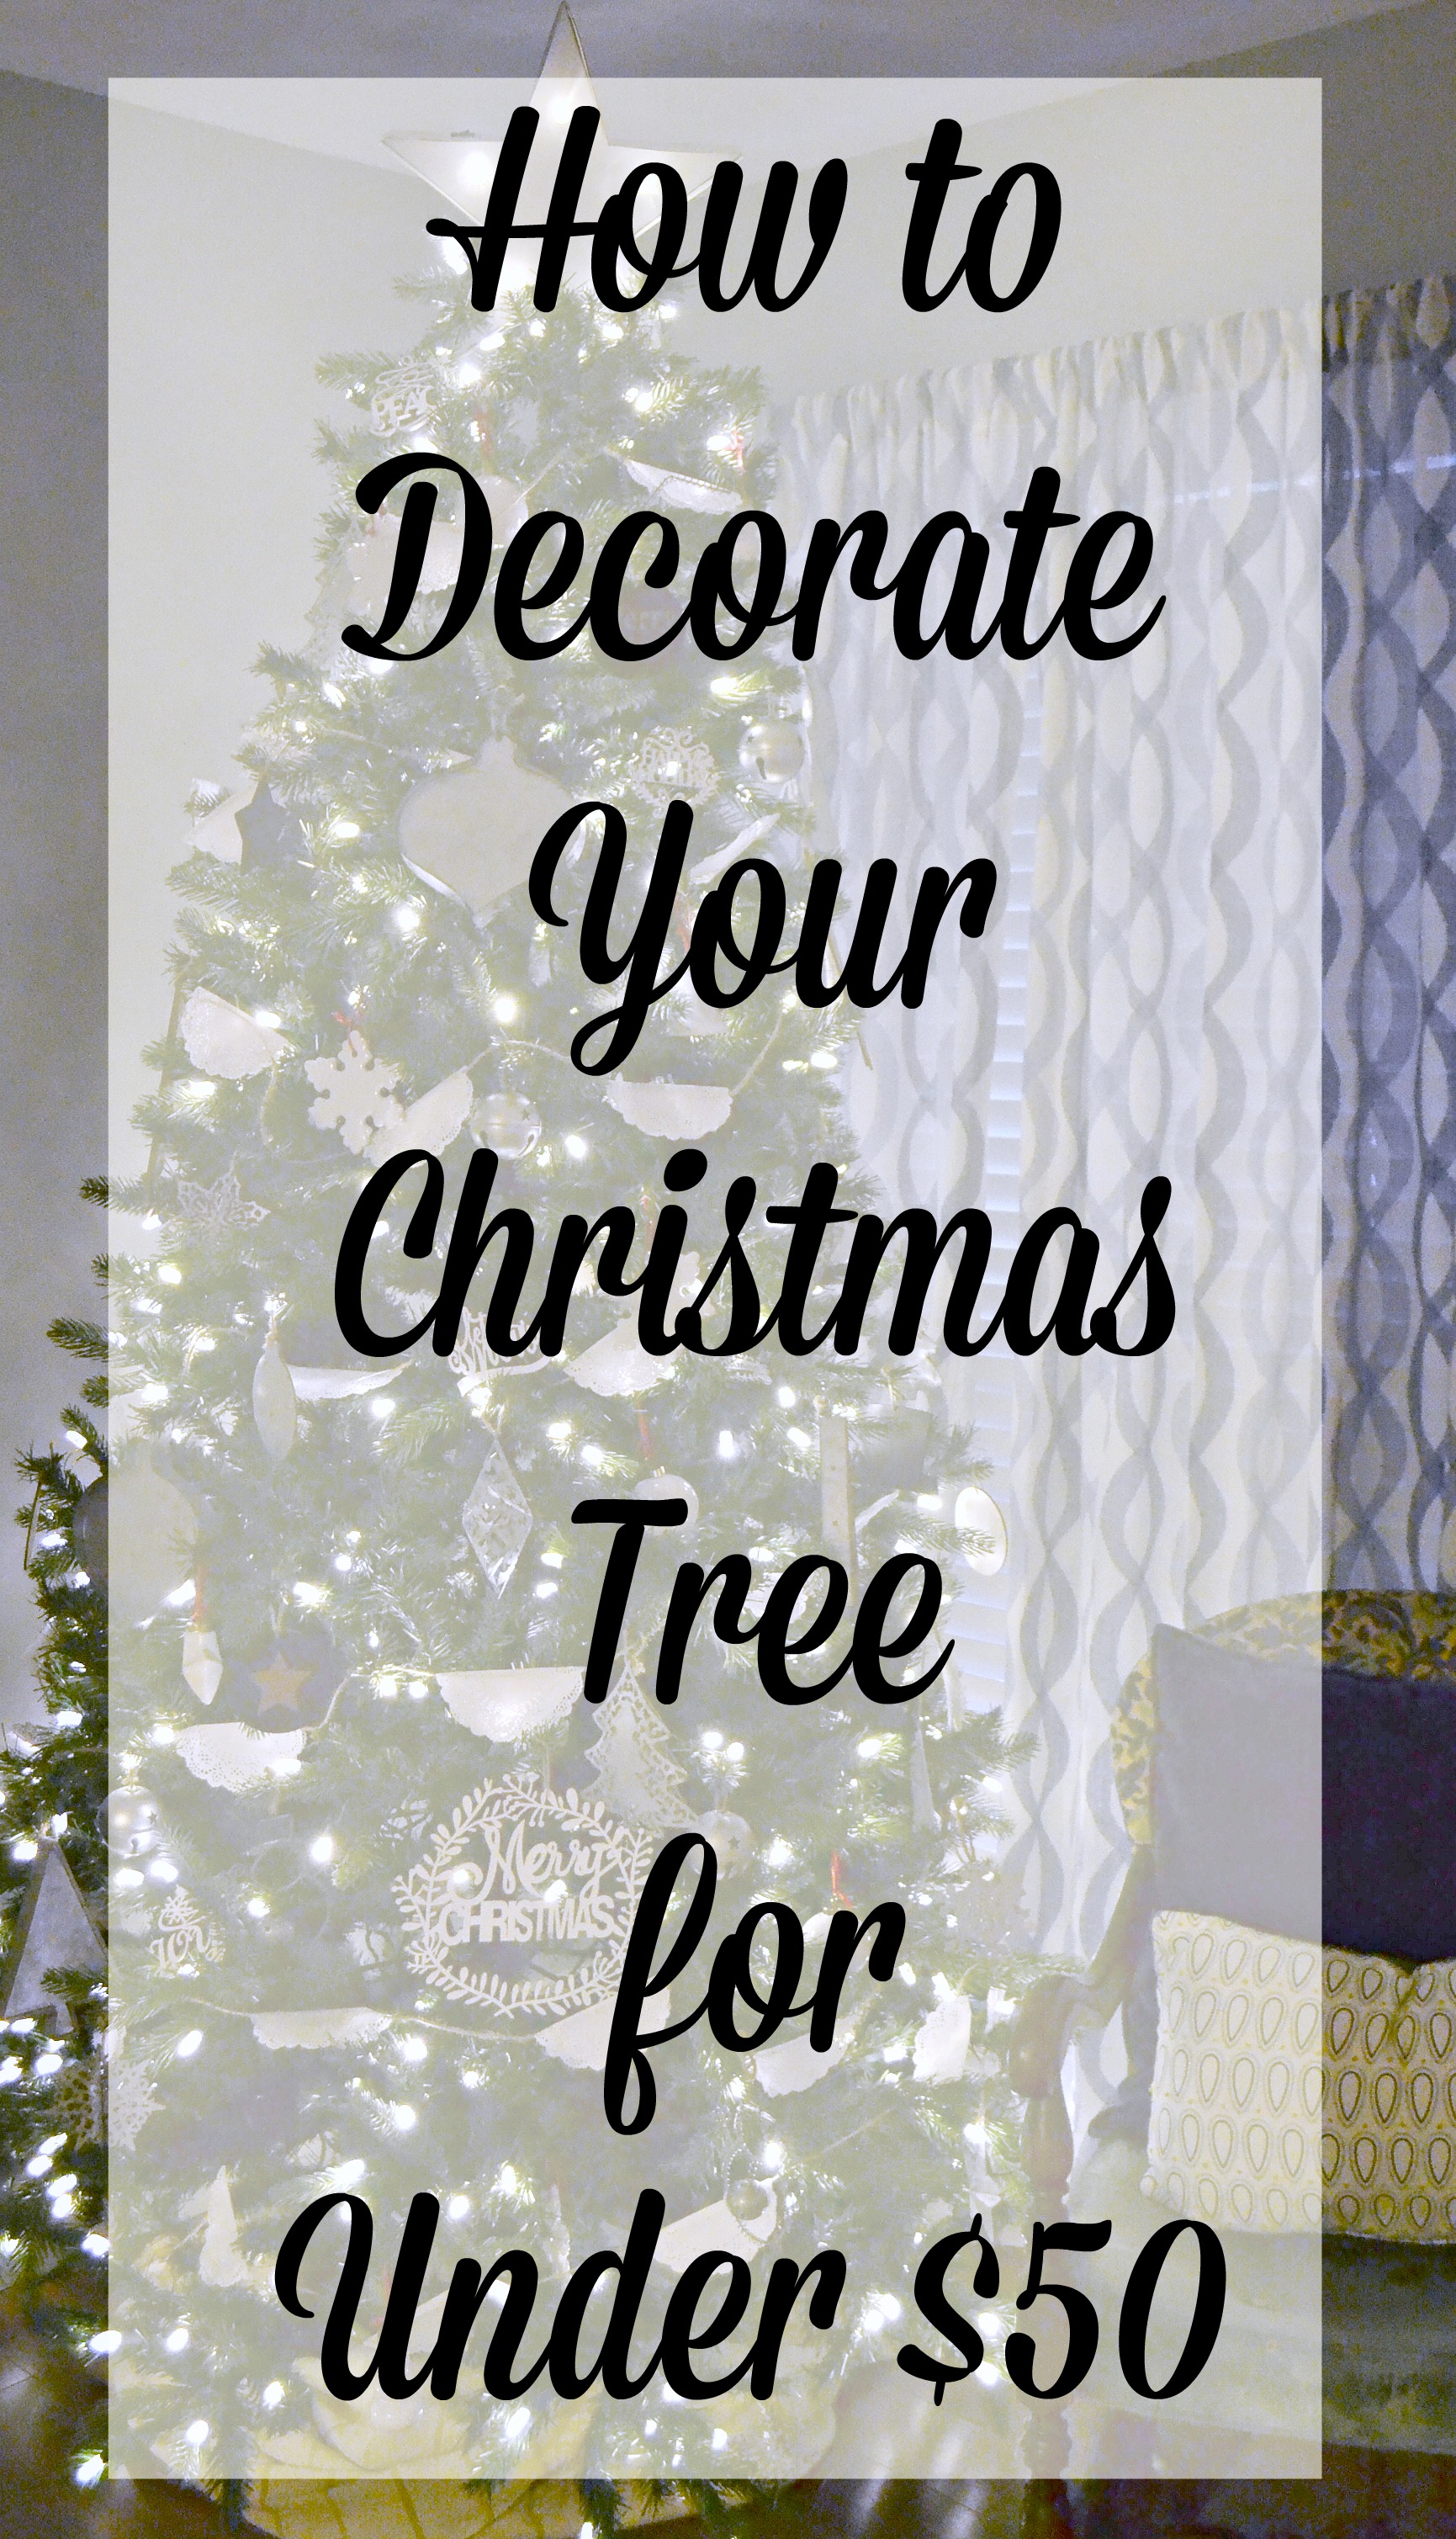 How to Decorate Your Christmas Tree for Under $50